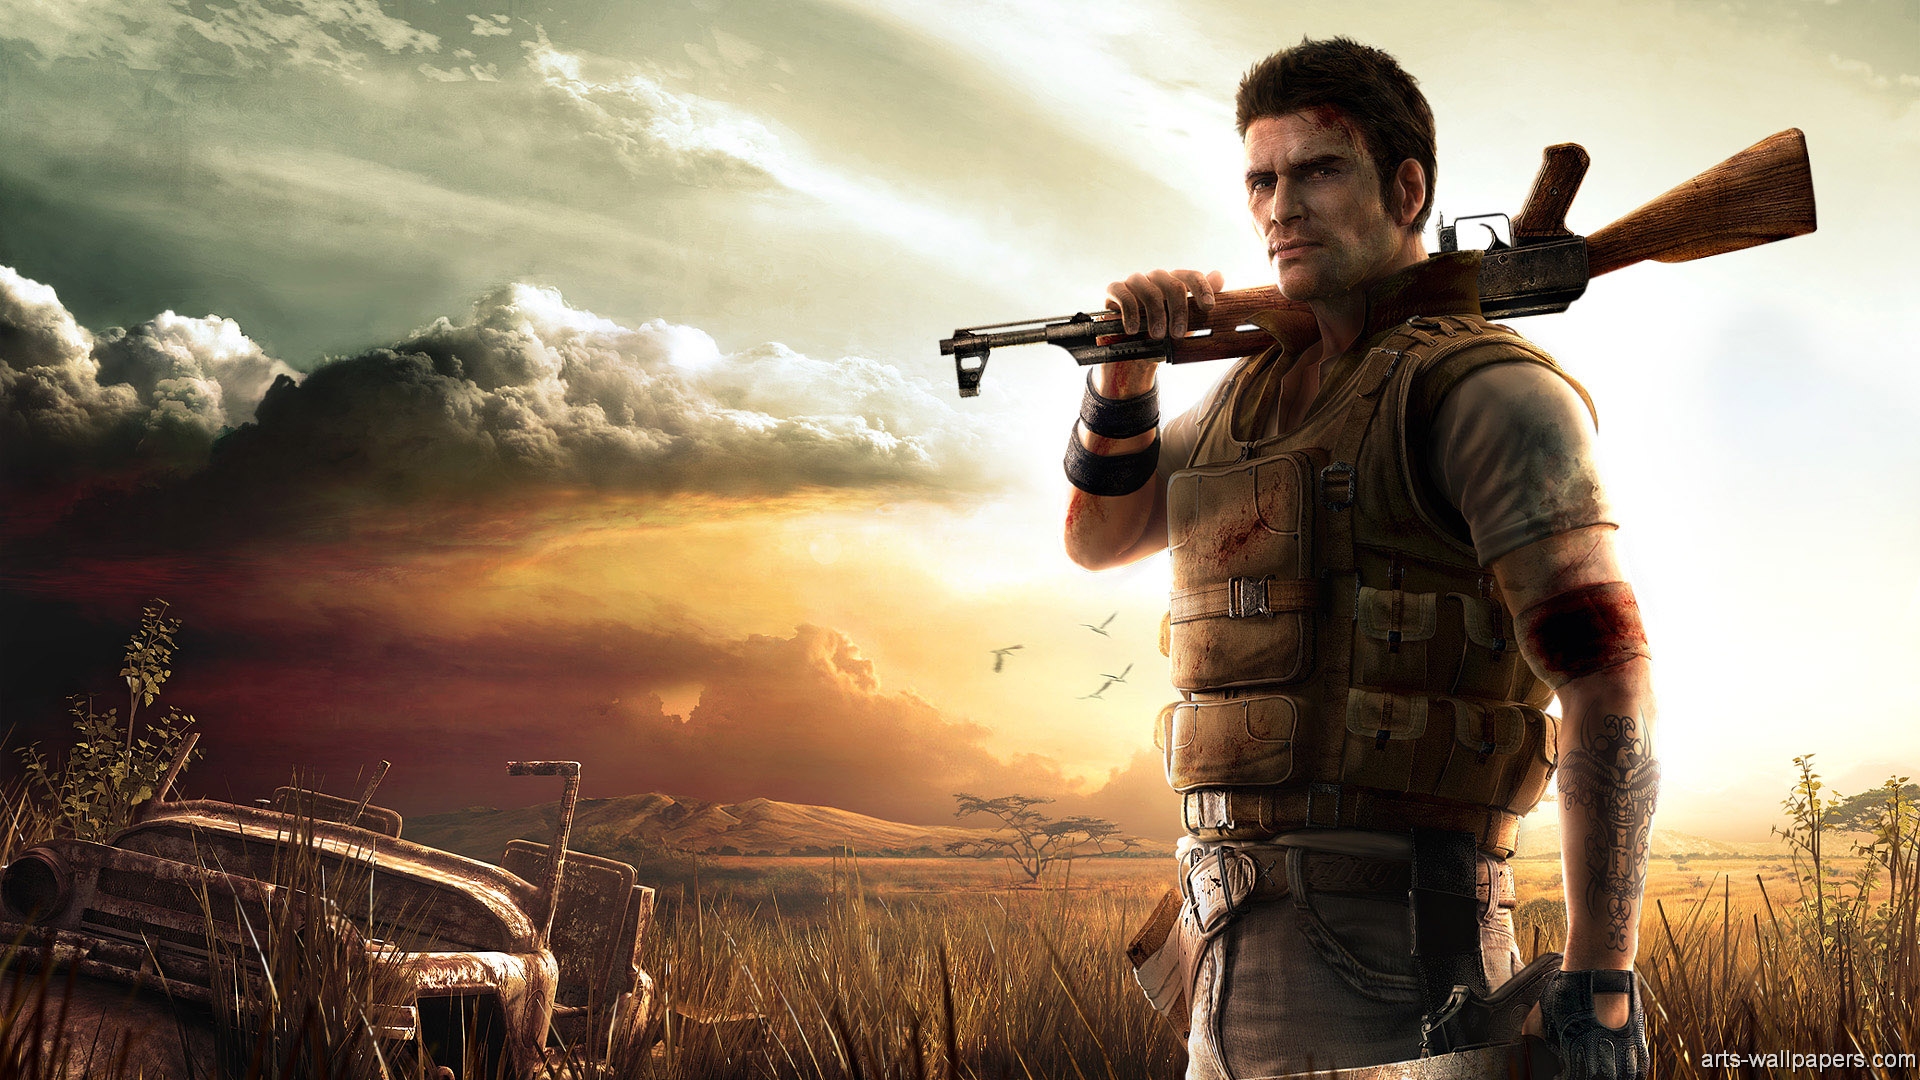 wallpaper hd 1920x1080 games,action adventure game,shooter game,movie,pc game,adventure game